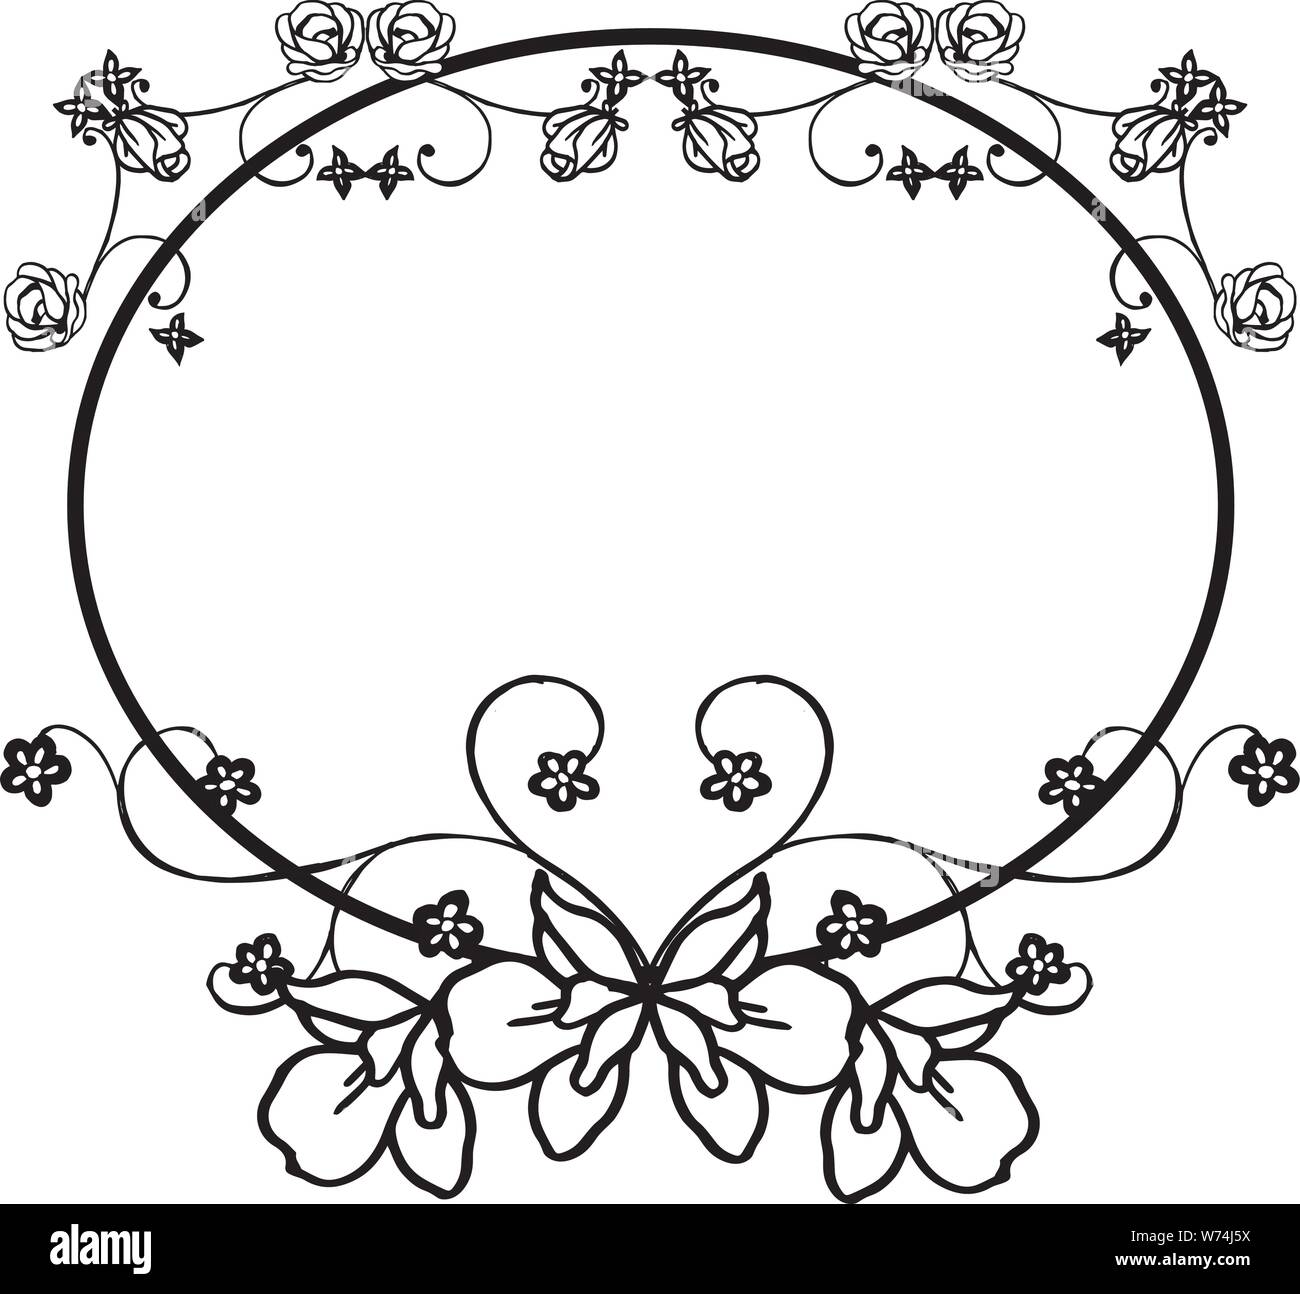 Geometric floral frame with rose flowers. Black outline simple desing  isolated on white background. Vector illustration.